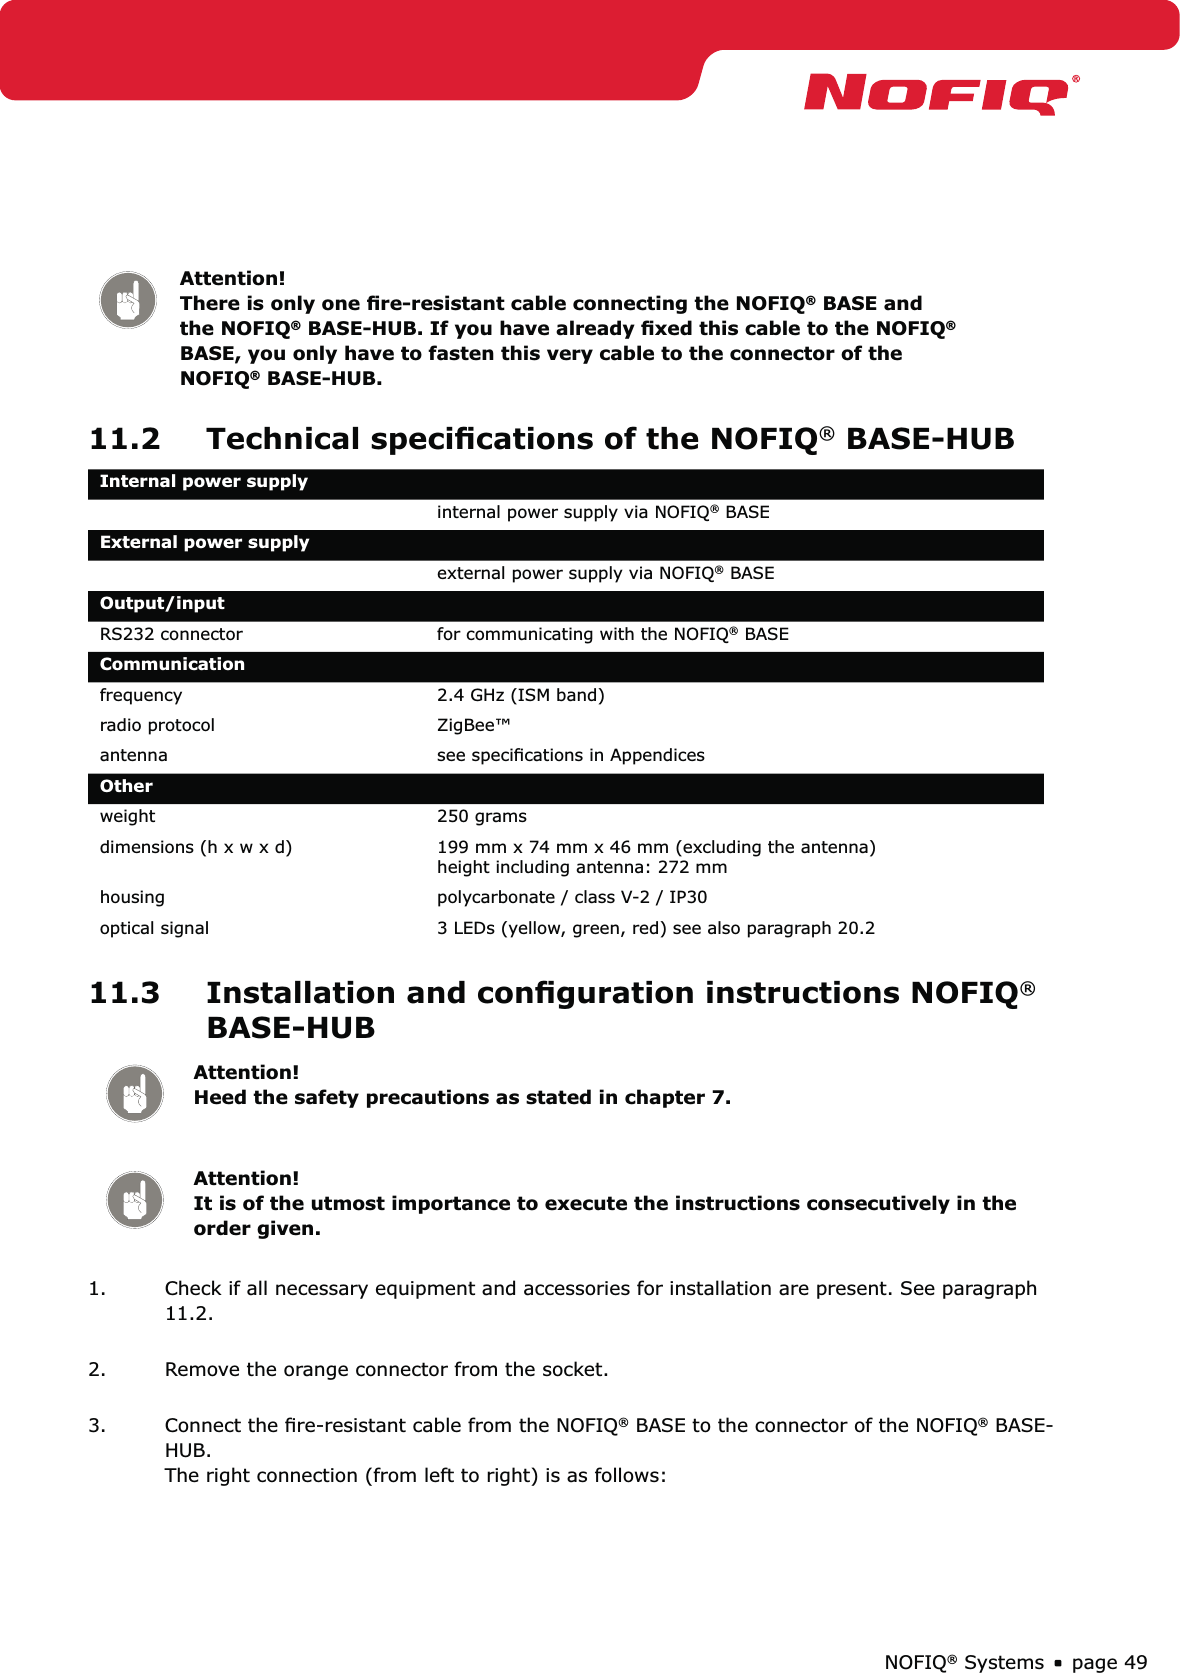 page 49NOFIQ® SystemsAttention! There is only one ﬁre-resistant cable connecting the NOFIQ® BASE and the NOFIQ® BASE-HUB. If you have already ﬁxed this cable to the NOFIQ® BASE, you only have to fasten this very cable to the connector of the NOFIQ® BASE-HUB.11.2  Technical speciﬁcations of the NOFIQ® BASE-HUBInternal power supplyinternal power supply via NOFIQ® BASEExternal power supplyexternal power supply via NOFIQ® BASEOutput/inputRS232 connector for communicating with the NOFIQ® BASECommunicationfrequency 2.4 GHz (ISM band) radio protocol ZigBee™antenna see speciﬁcations in AppendicesOtherweight 250 gramsdimensions (h x w x d) 199 mm x 74 mm x 46 mm (excluding the antenna) height including antenna: 272 mmhousing  polycarbonate / class V-2 / IP30optical signal 3 LEDs (yellow, green, red) see also paragraph 20.211.3  Installation and conﬁguration instructions NOFIQ® BASE-HUBAttention! Heed the safety precautions as stated in chapter 7.Attention! It is of the utmost importance to execute the instructions consecutively in the order given.1.  Check if all necessary equipment and accessories for installation are present. See paragraph 11.2. 2.  Remove the orange connector from the socket. 3.  Connect the ﬁre-resistant cable from the NOFIQ® BASE to the connector of the NOFIQ® BASE-HUB.  The right connection (from left to right) is as follows: 